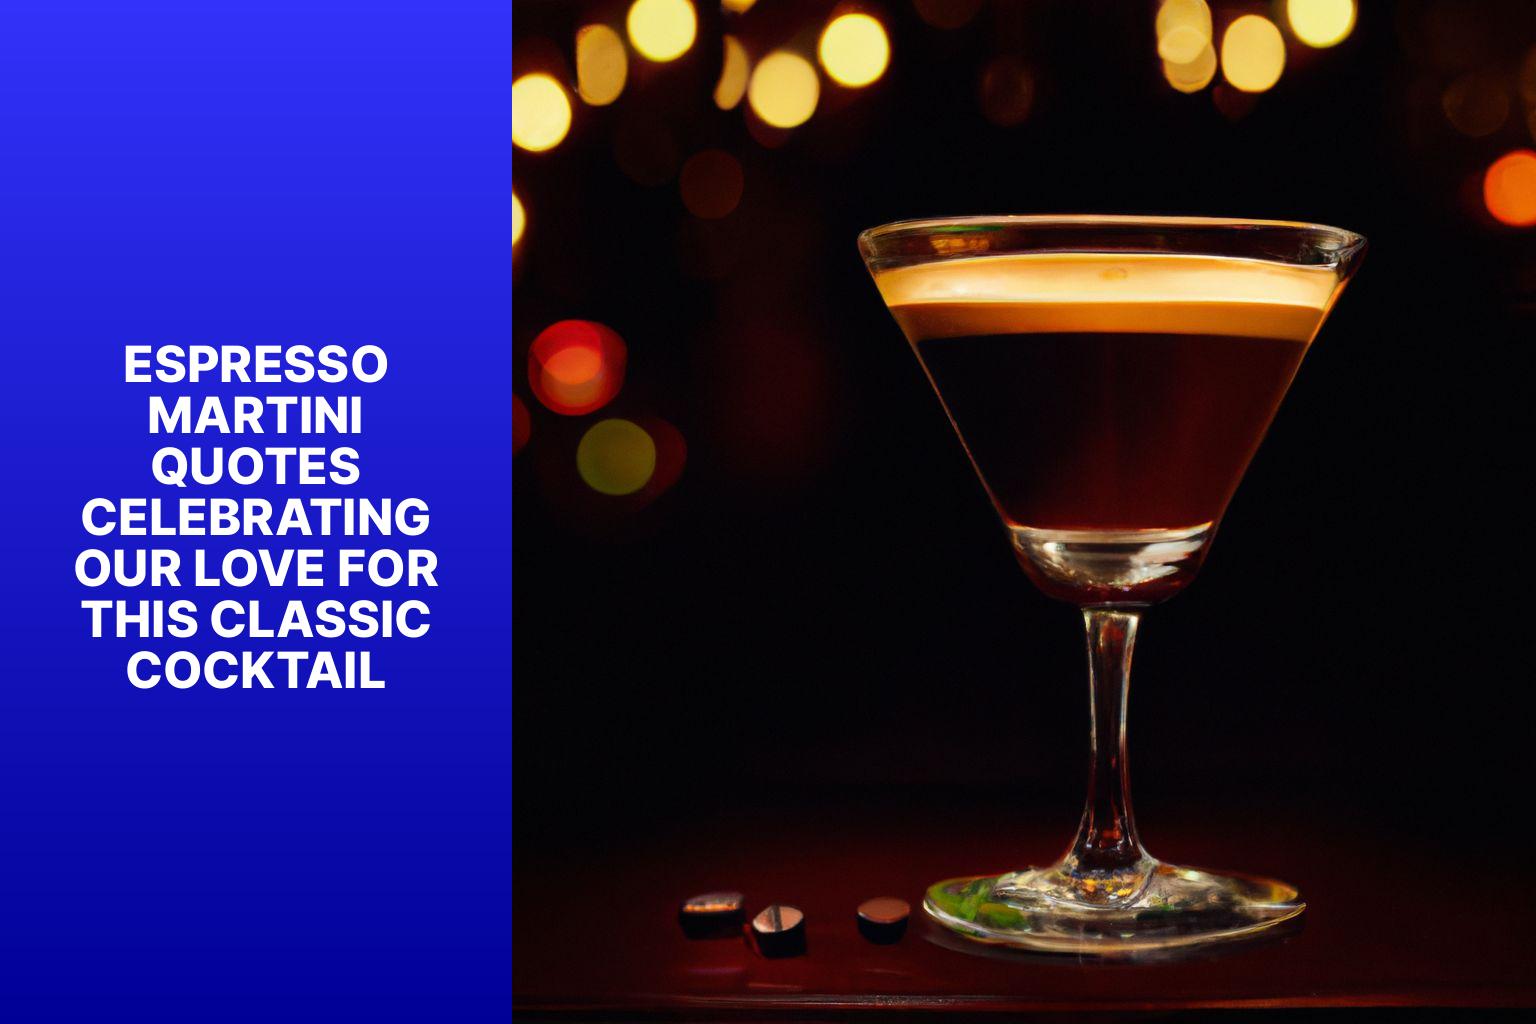 Espresso Martini Quotes: Celebrating Our Love for this Classic Cocktail